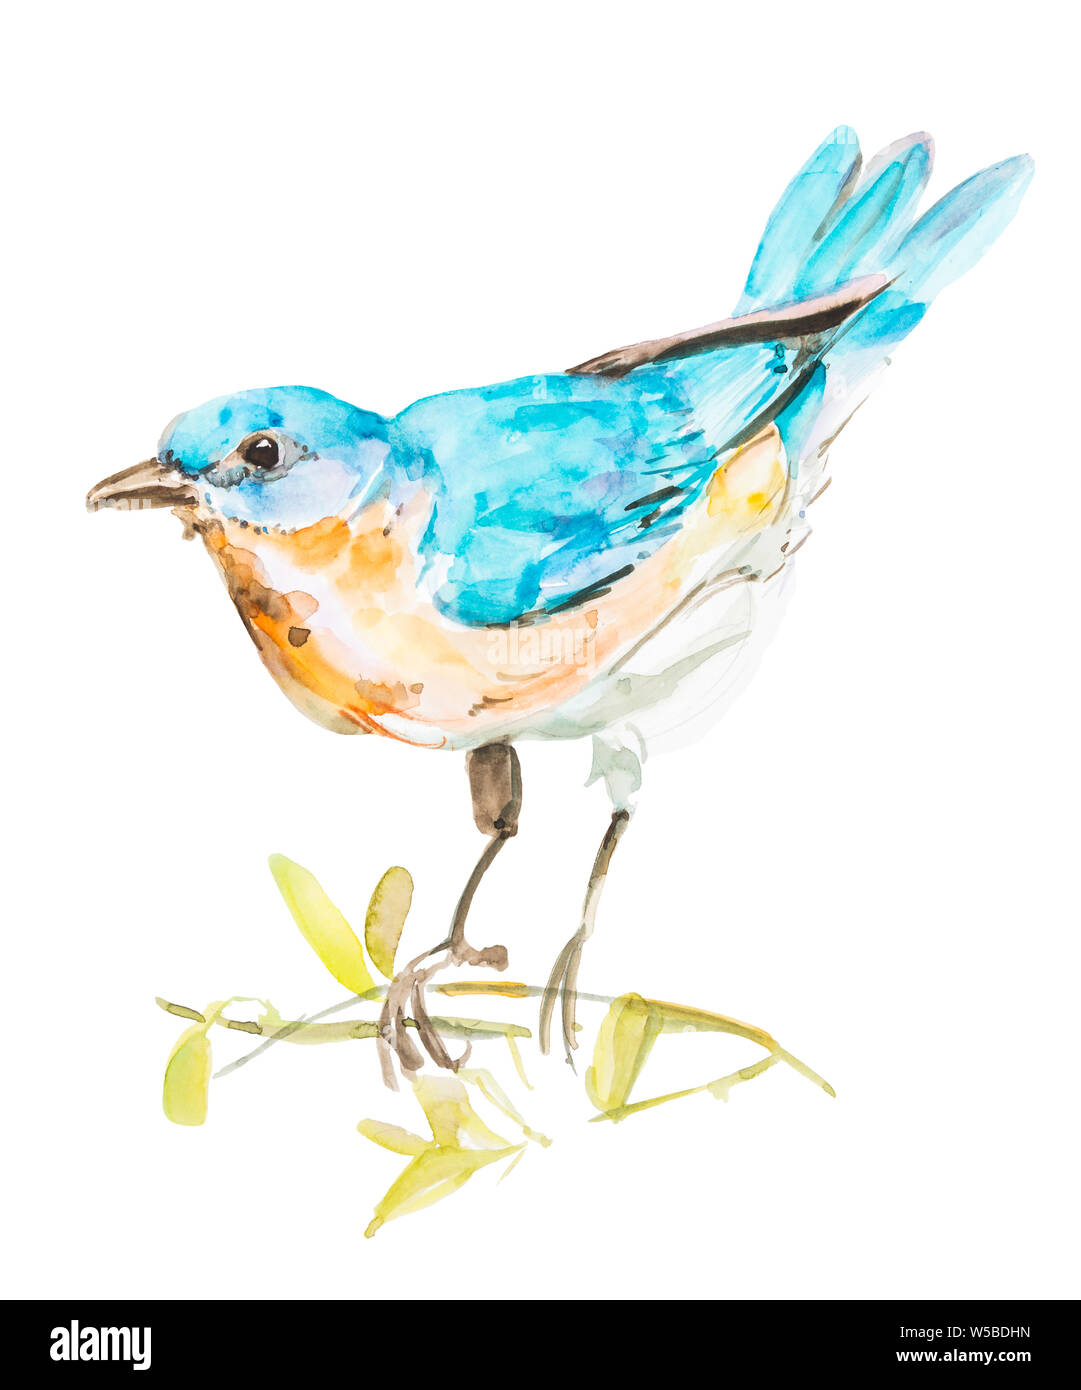 Little Blue Bird, Watercolor Hand Painting On Isolated White Background Stock Photo - Alamy